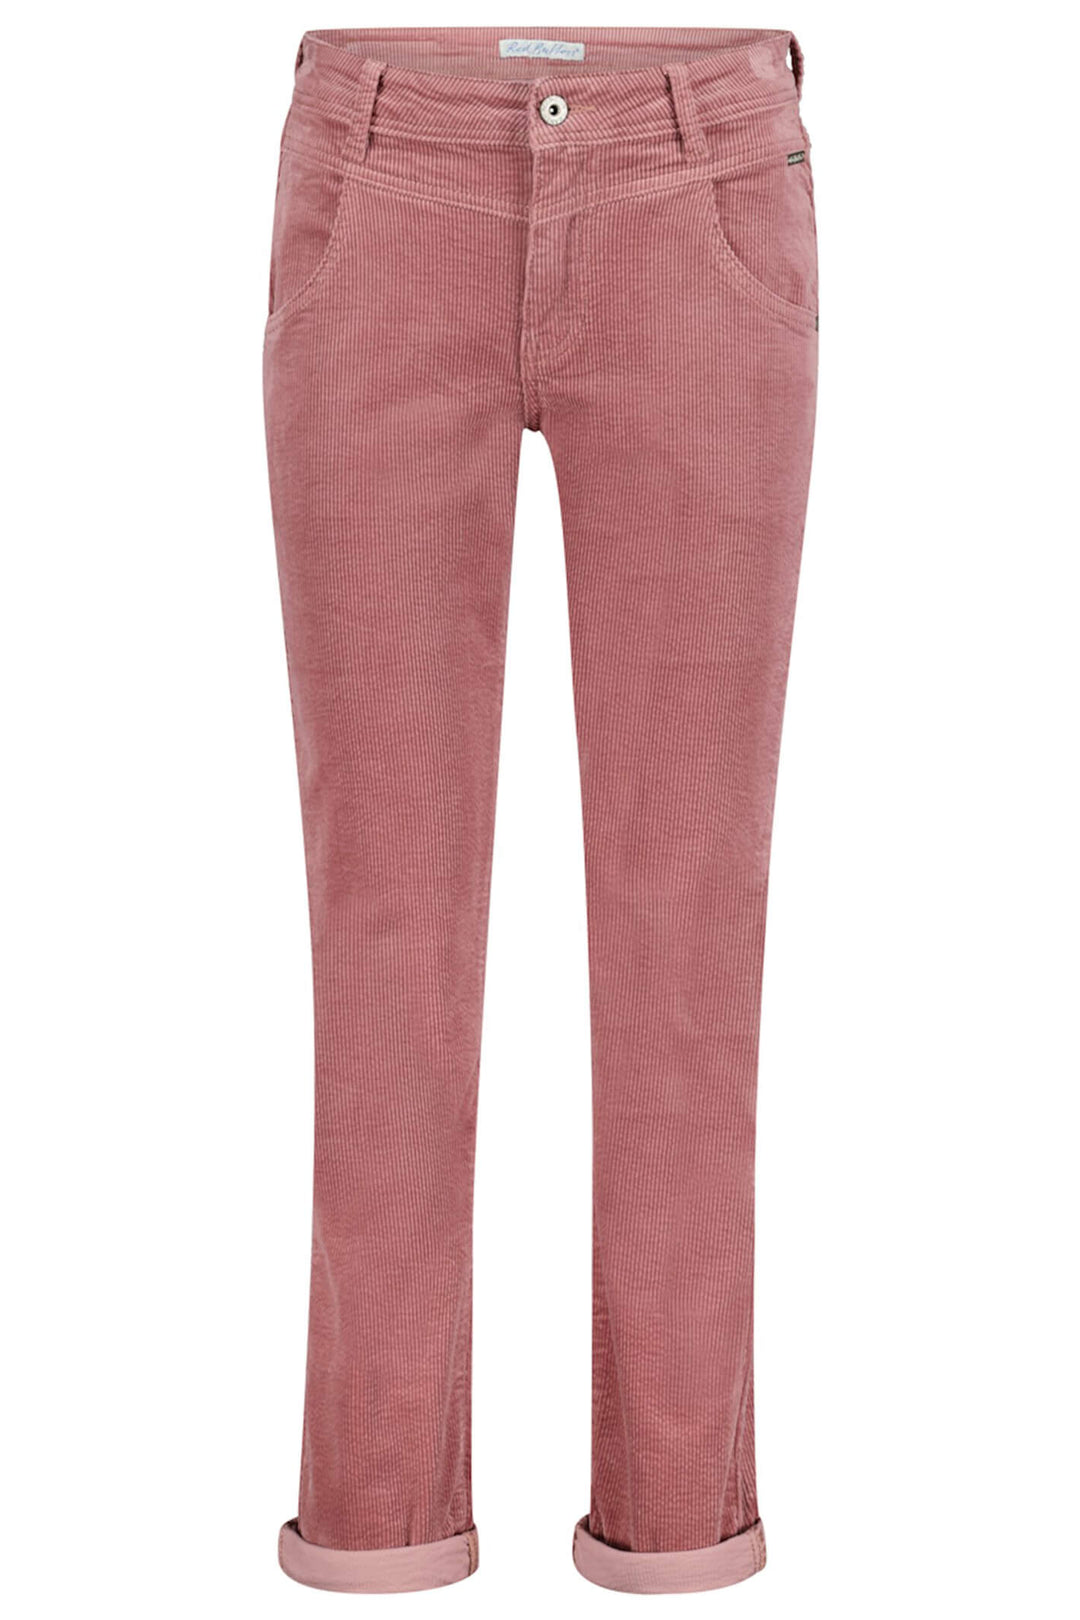 Red Button SRB4084 Sienna Wild Rose Pink Corduroy Trousers - Olivia Grace Fashion